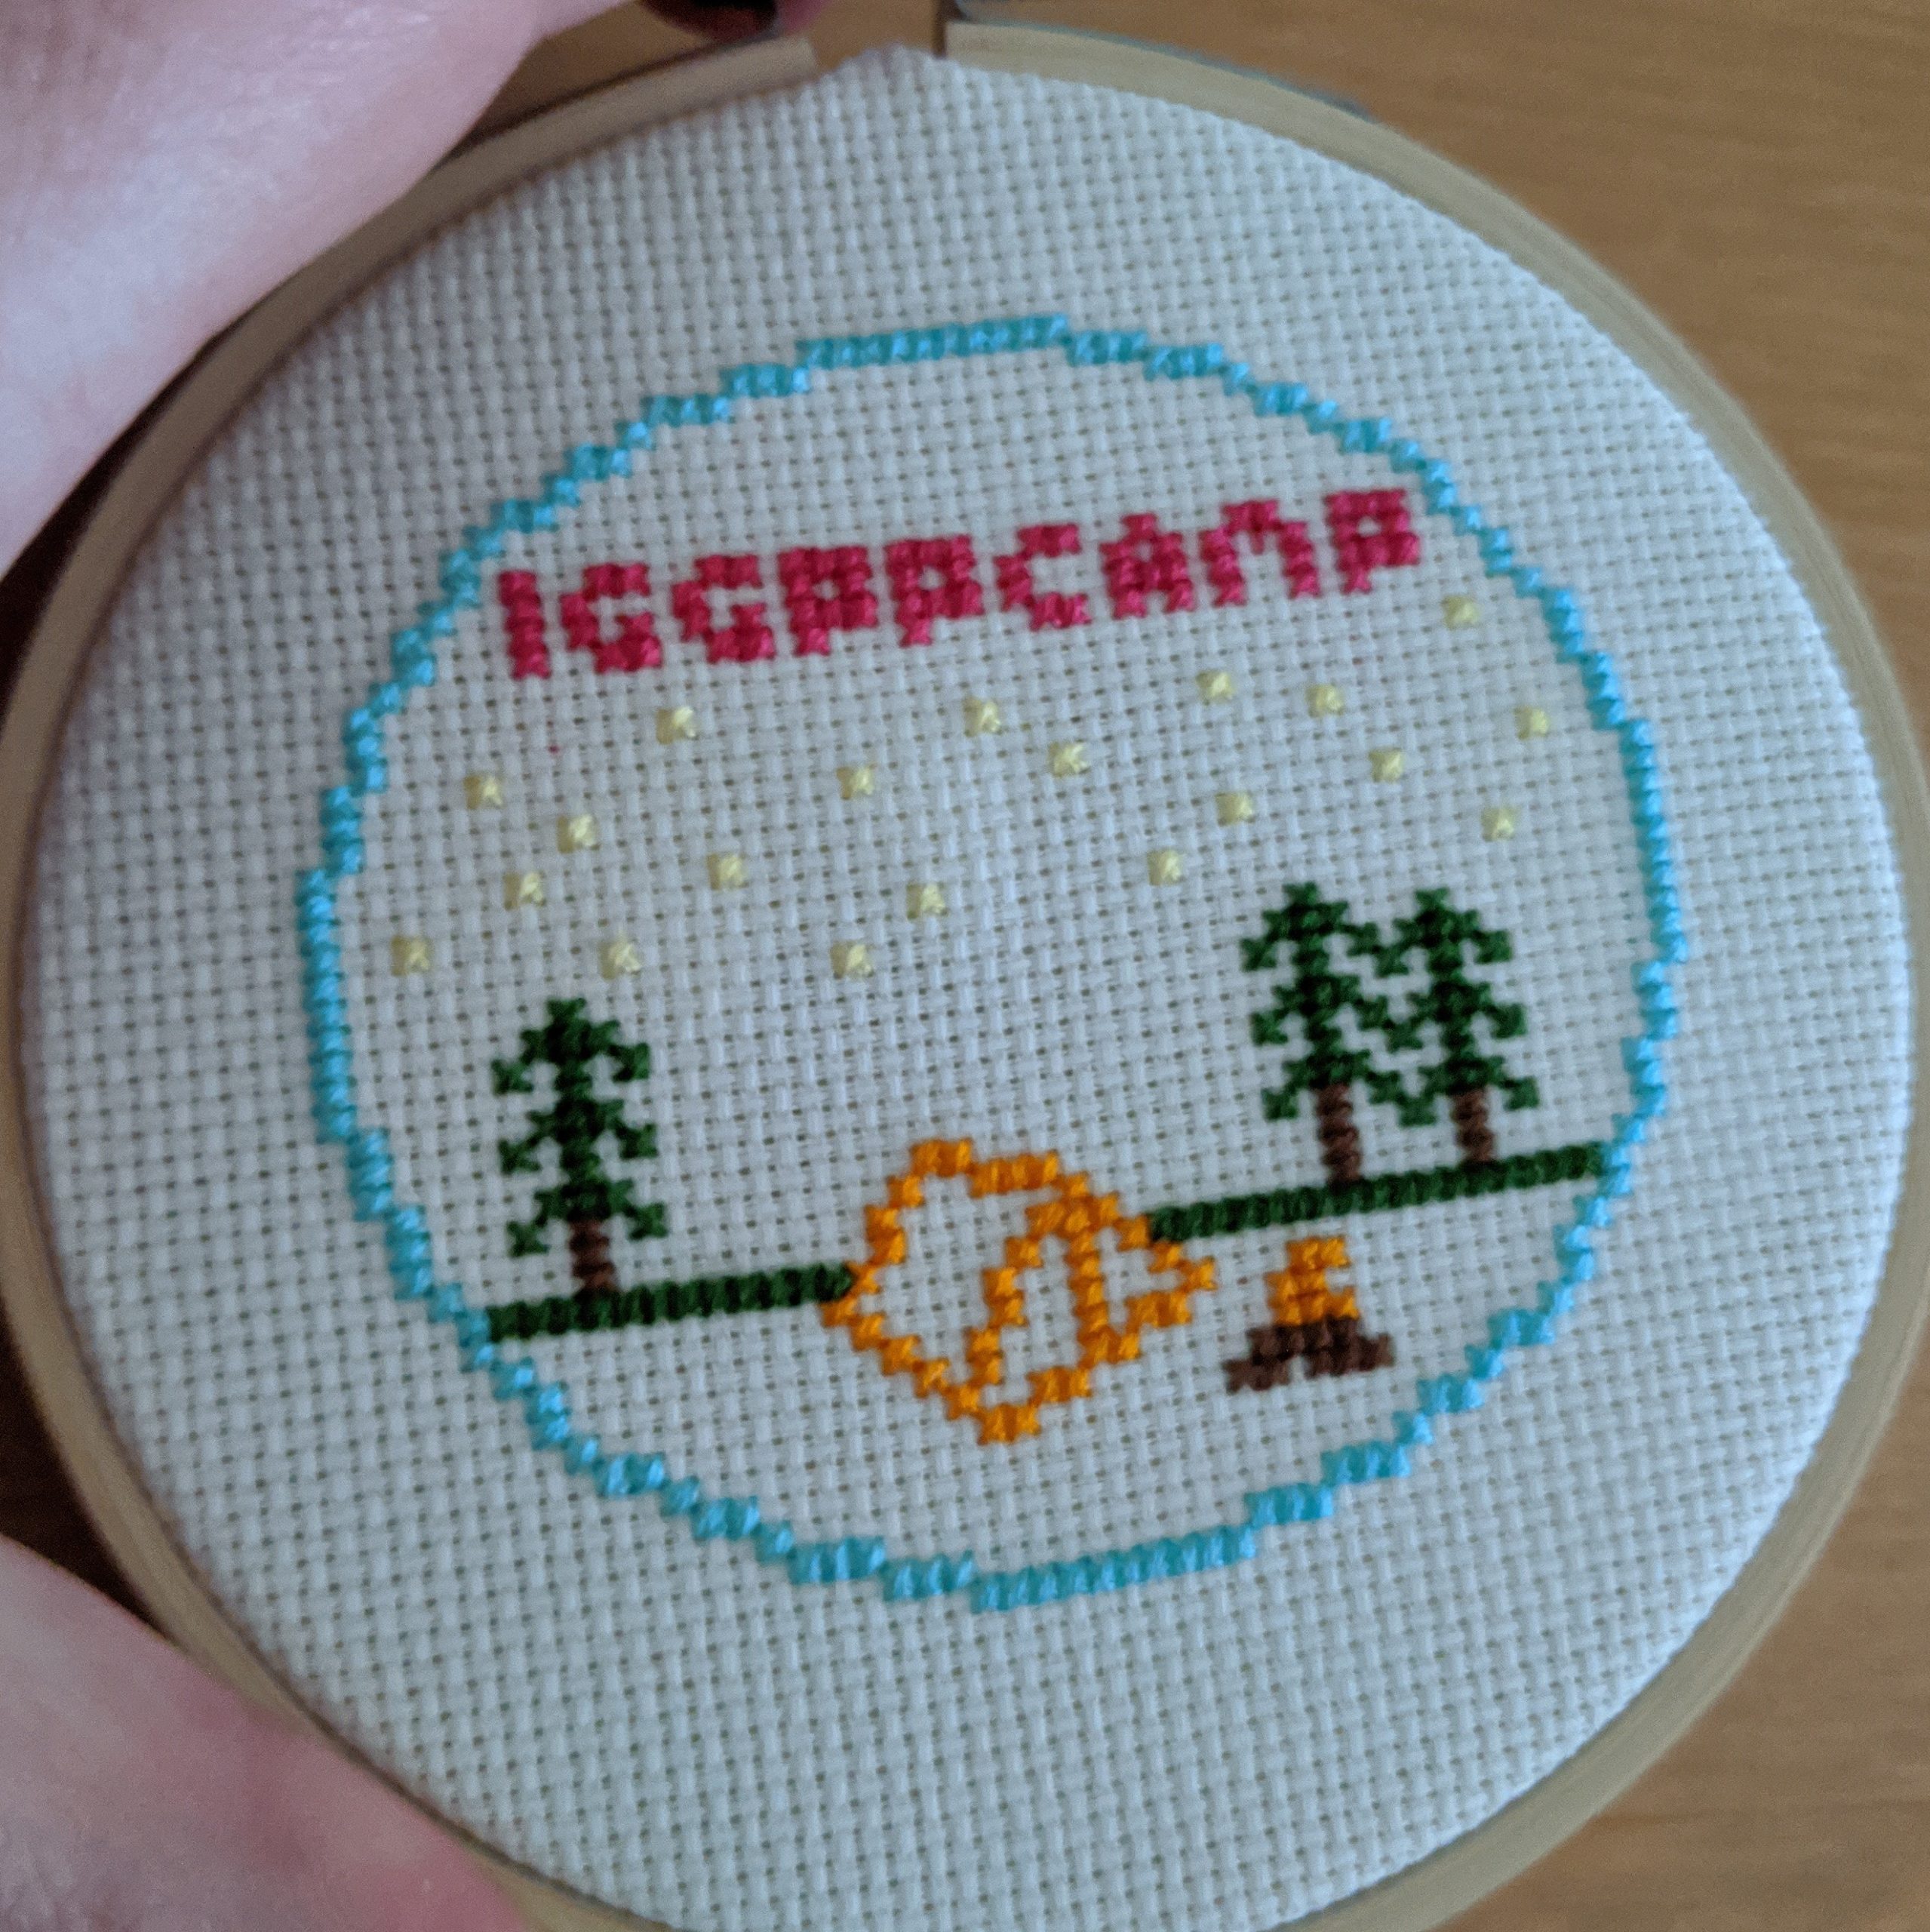 completed cross-stitch